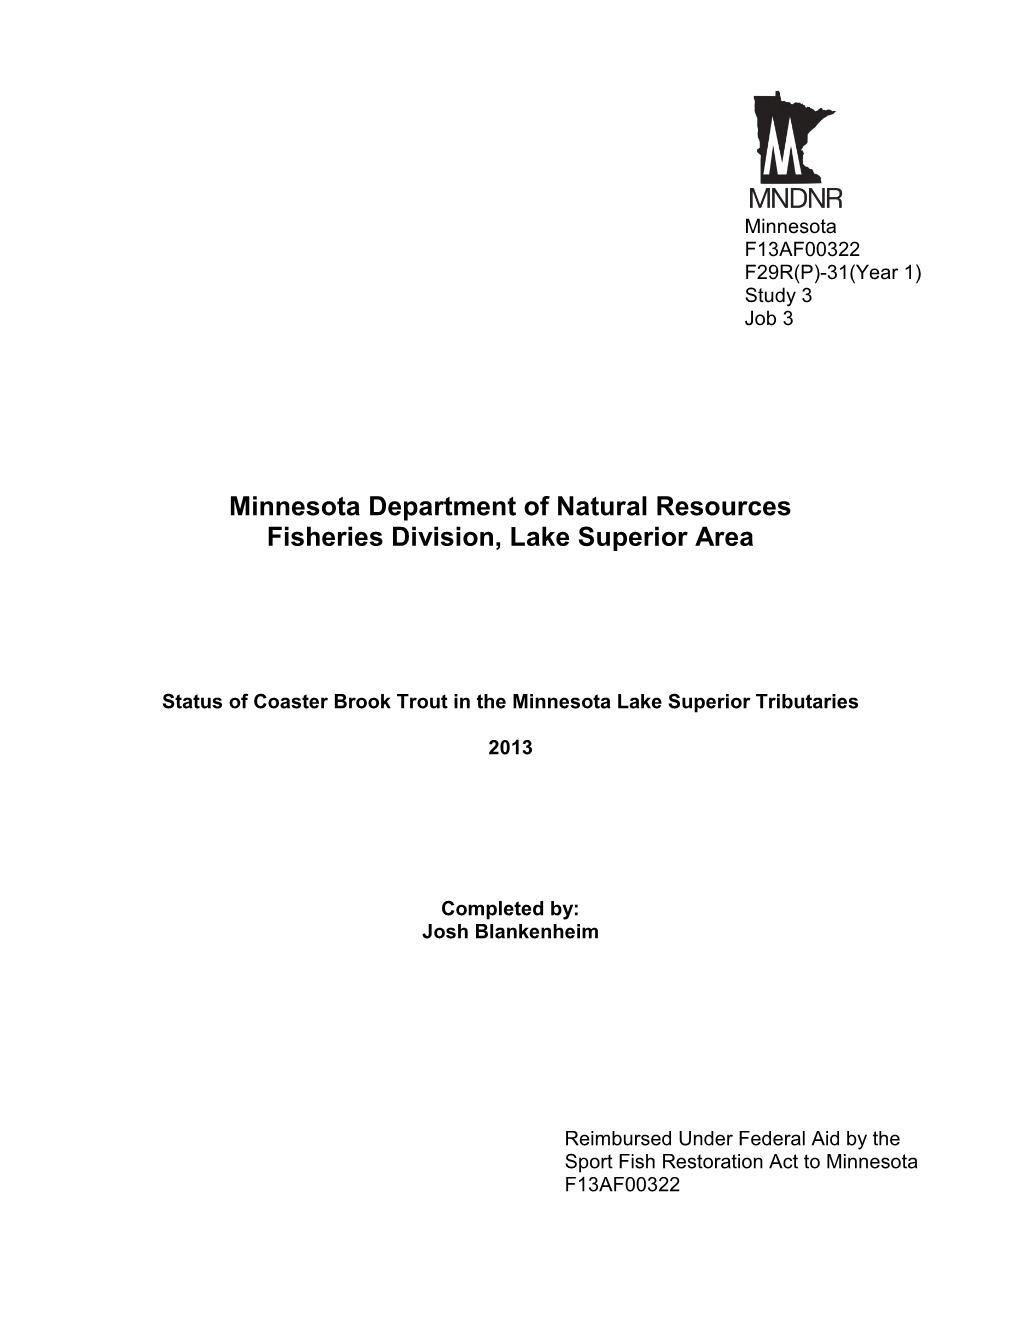 Minnesota Department of Natural Resources Fisheries Division, Lake Superior Area